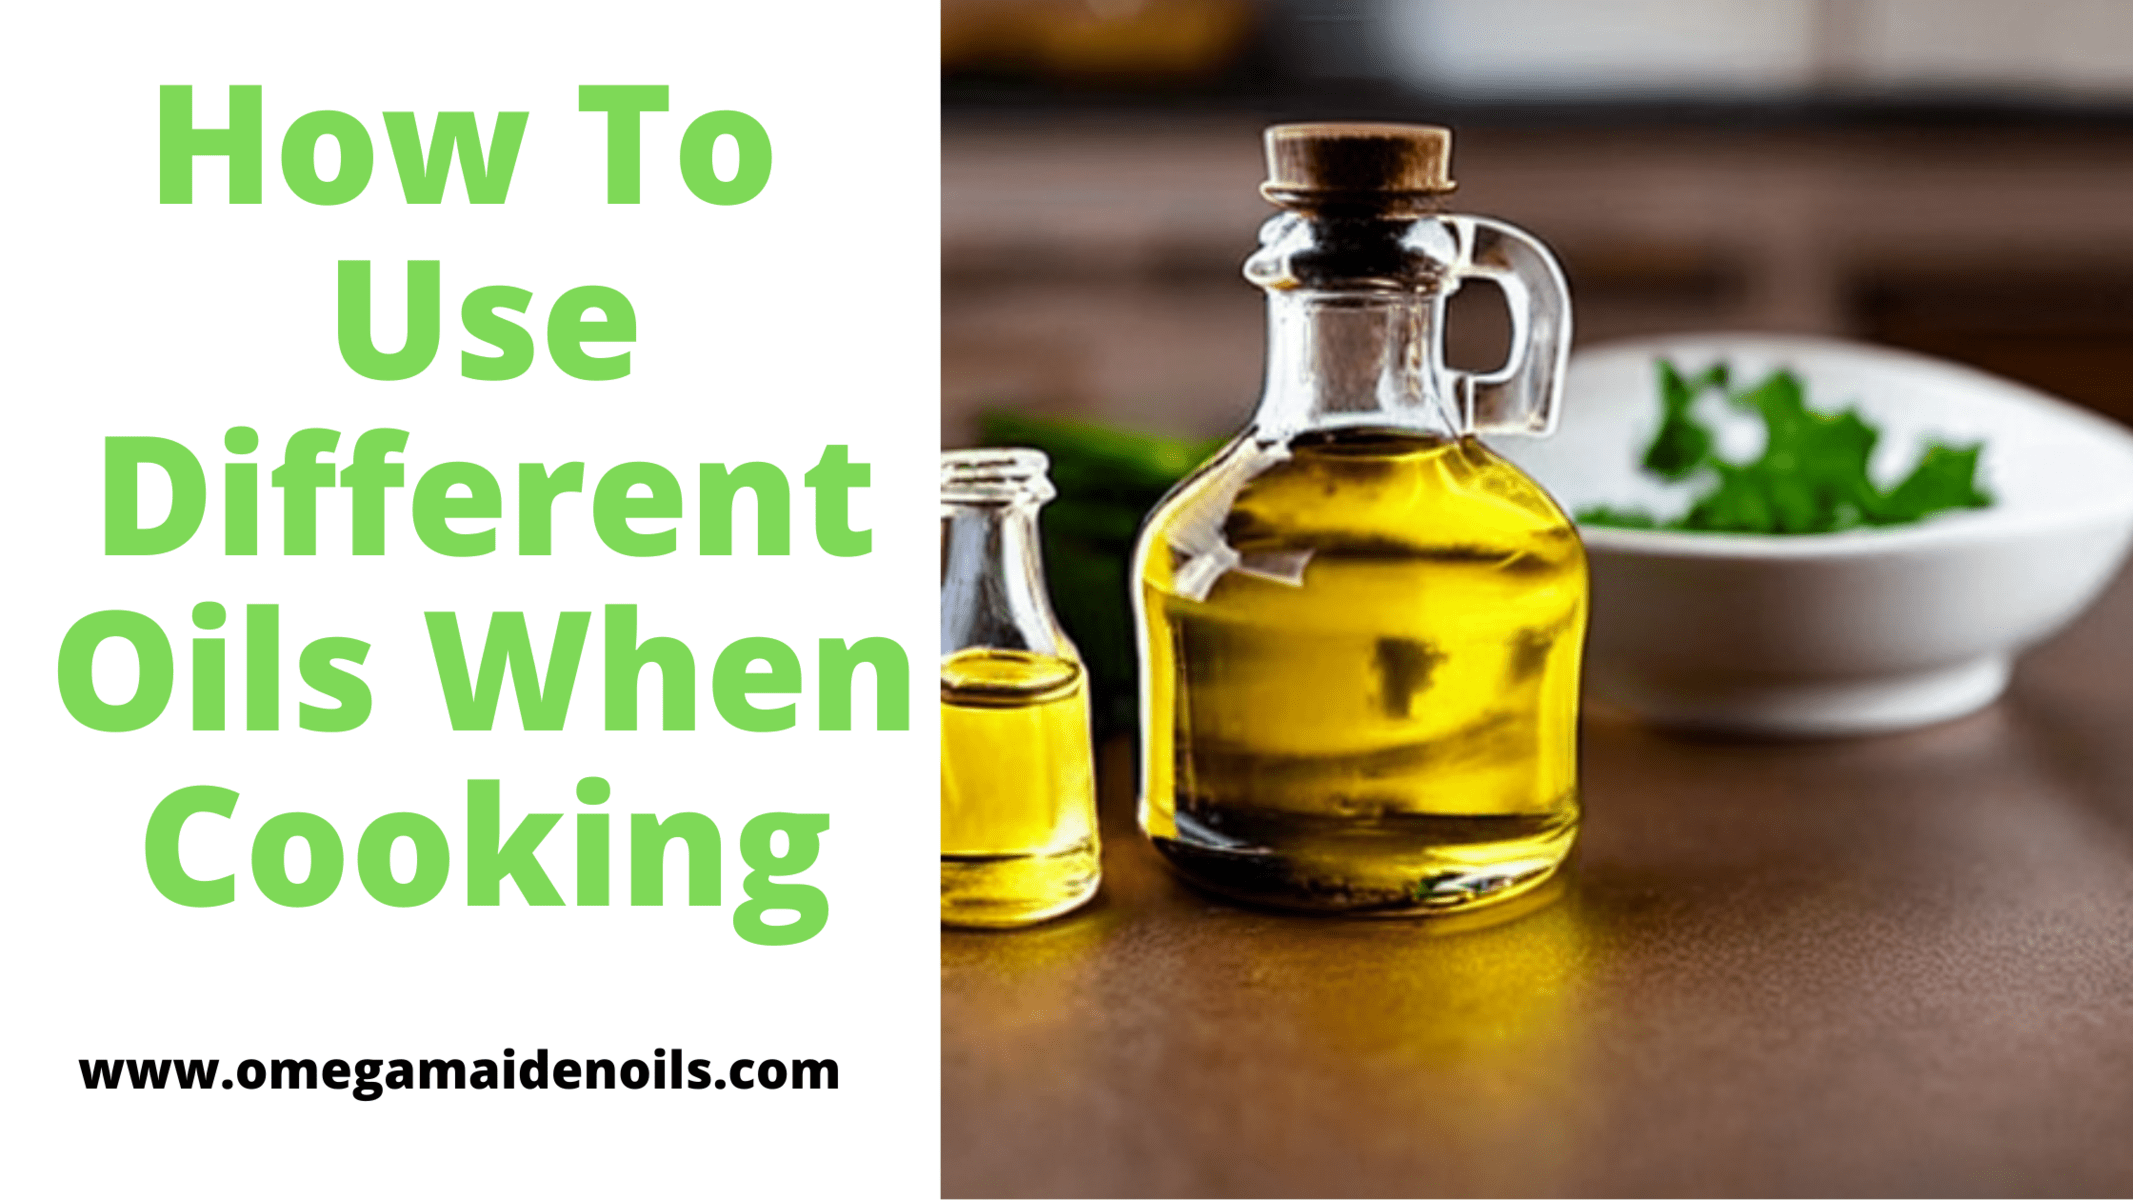 How To Use Different Oils When Cooking